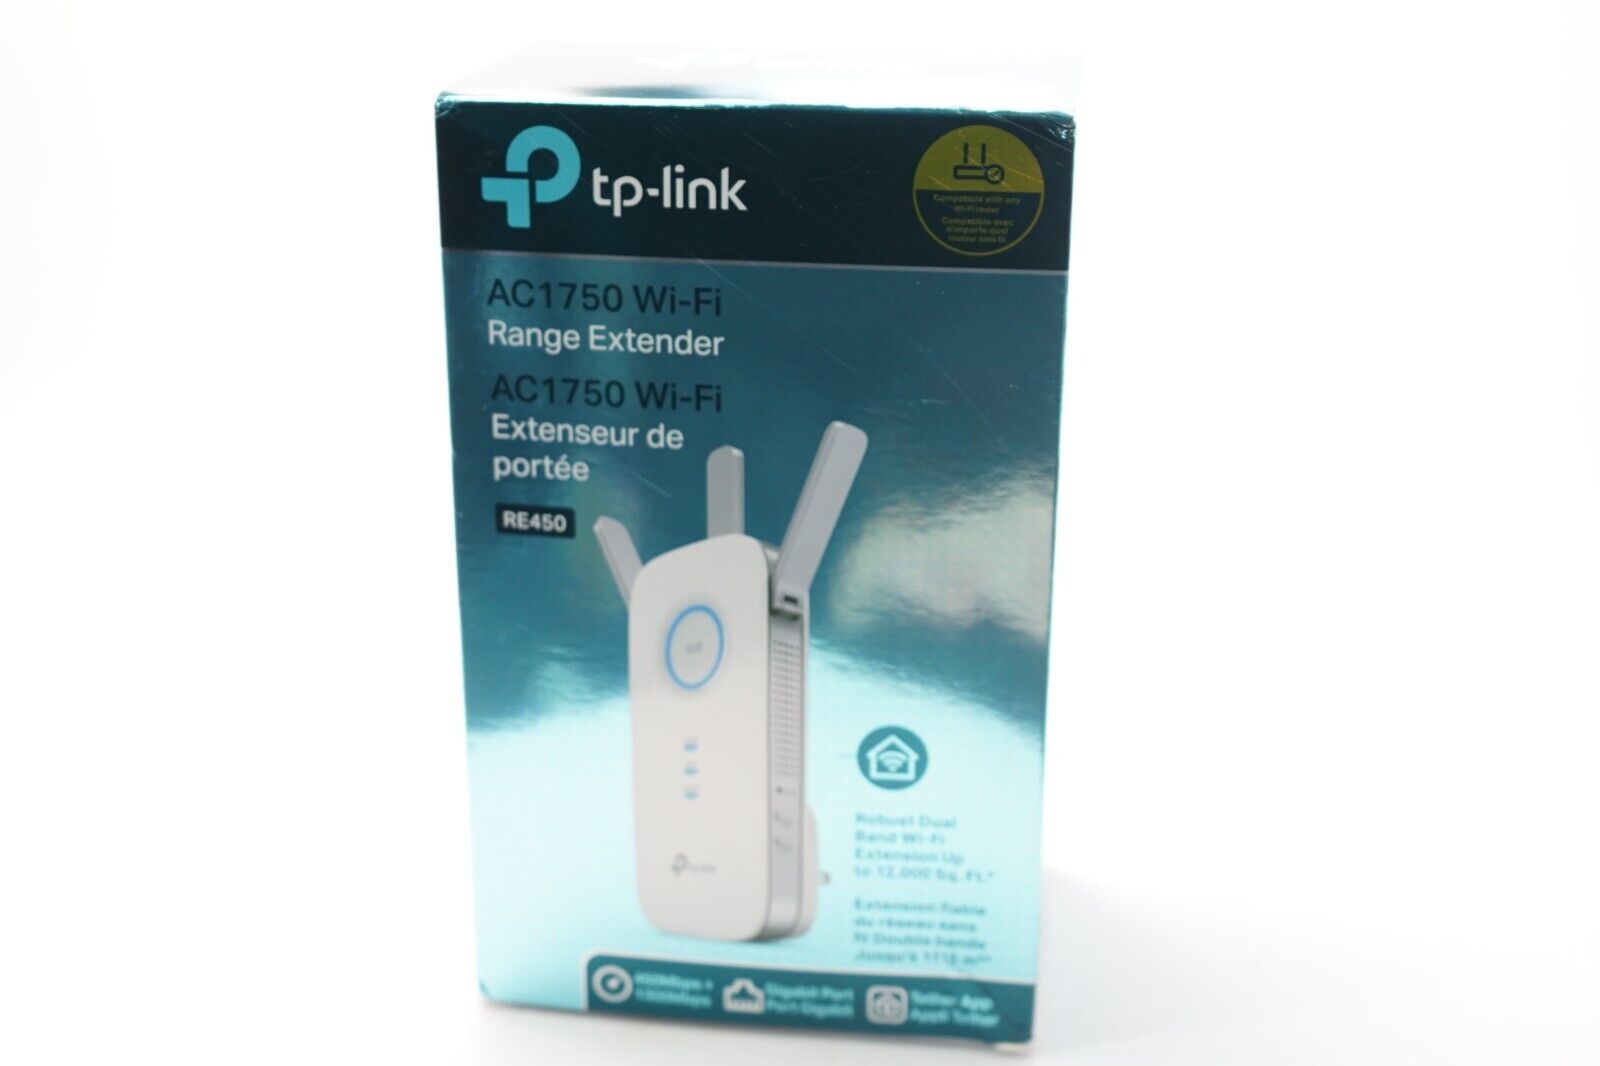 TP-LINK AC1750 Wi-Fi Dual Band Range Extender (oneMesh) - RE450 New